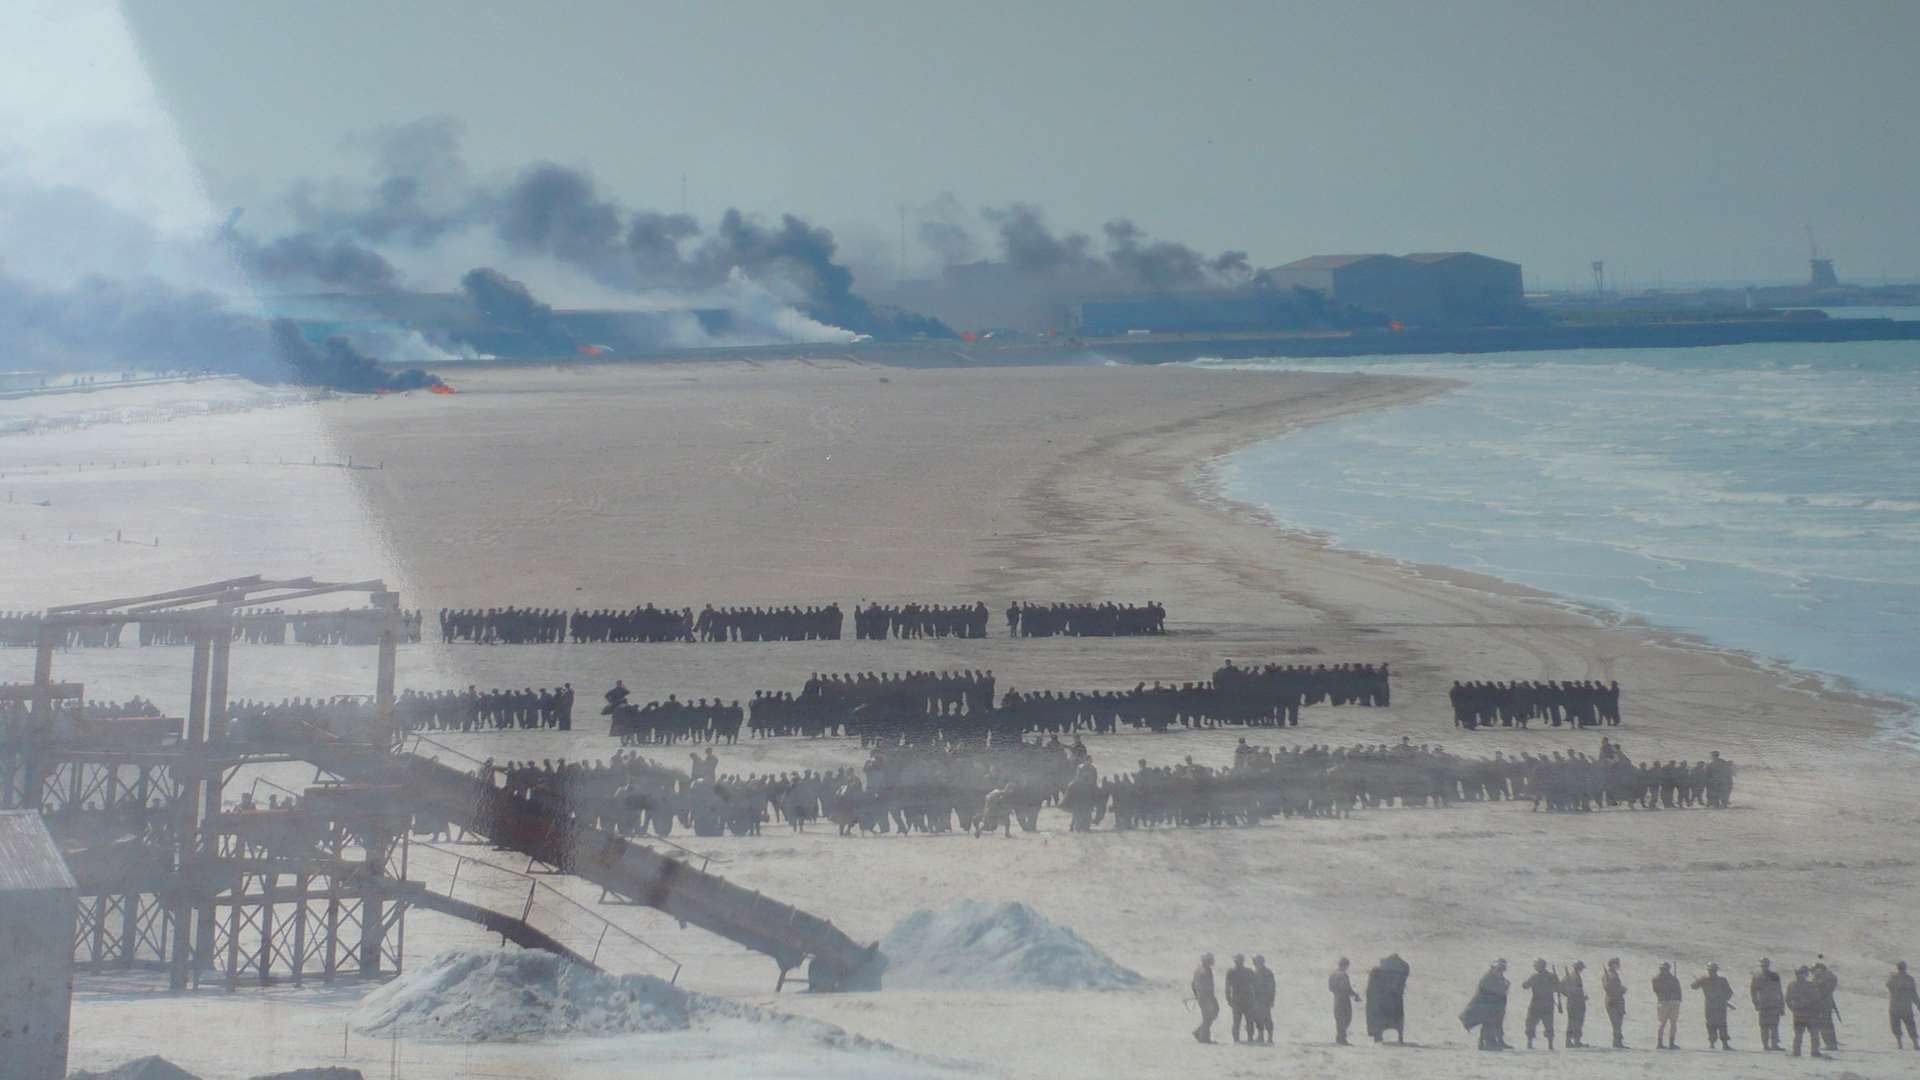 Dunkirk beach was transformed with thousands of extras and factories were made to look on fire for the film.